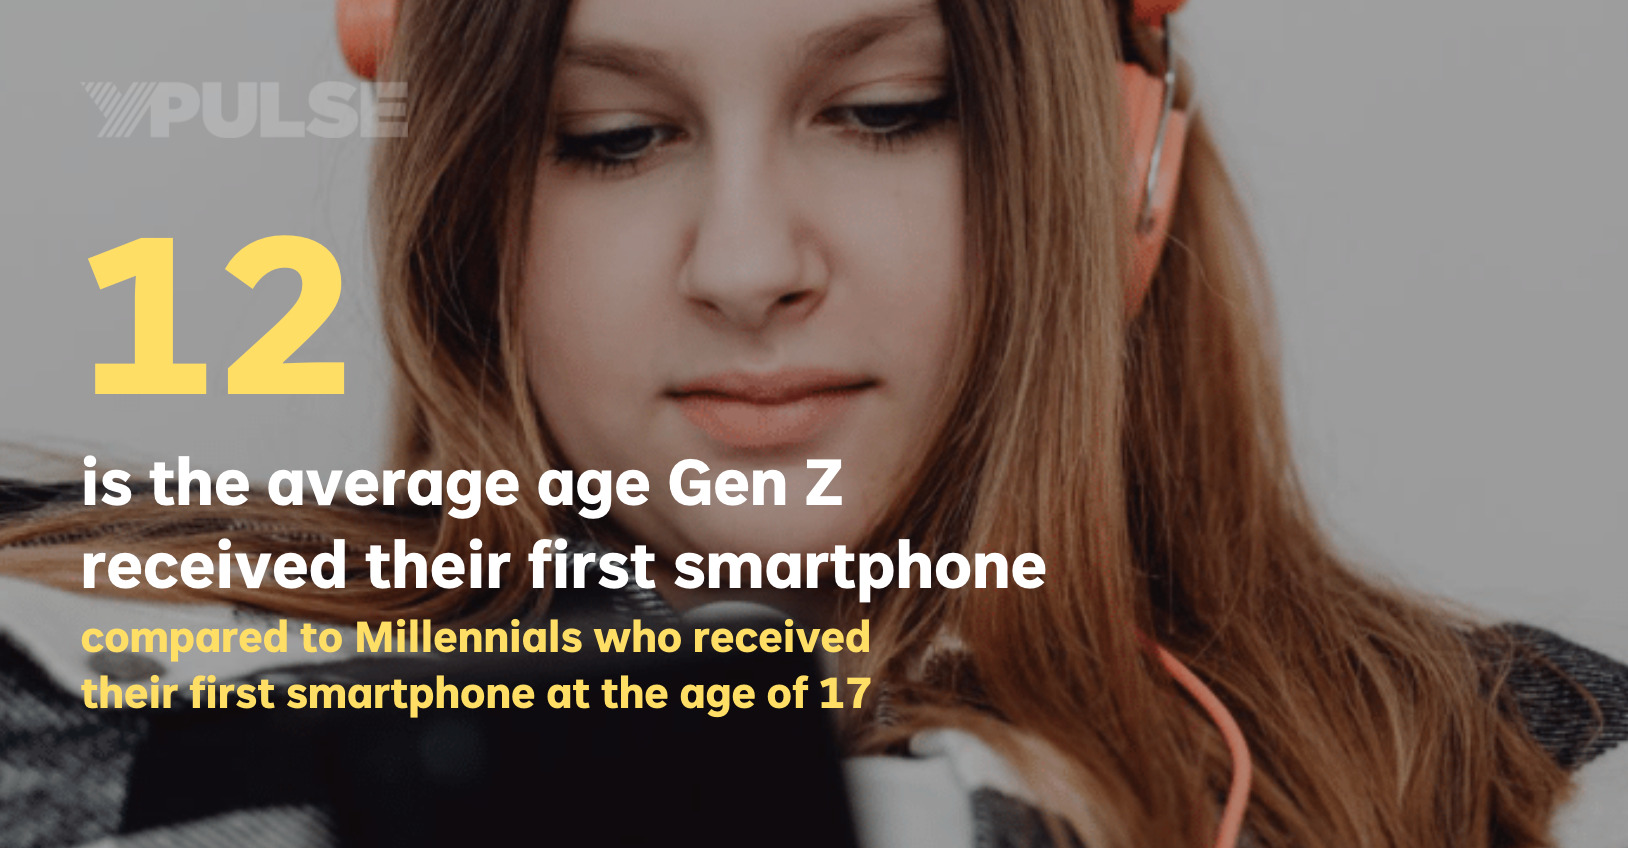 Gen-z was introduced to smartphones at 12 years old, five years younger than Millennials on average